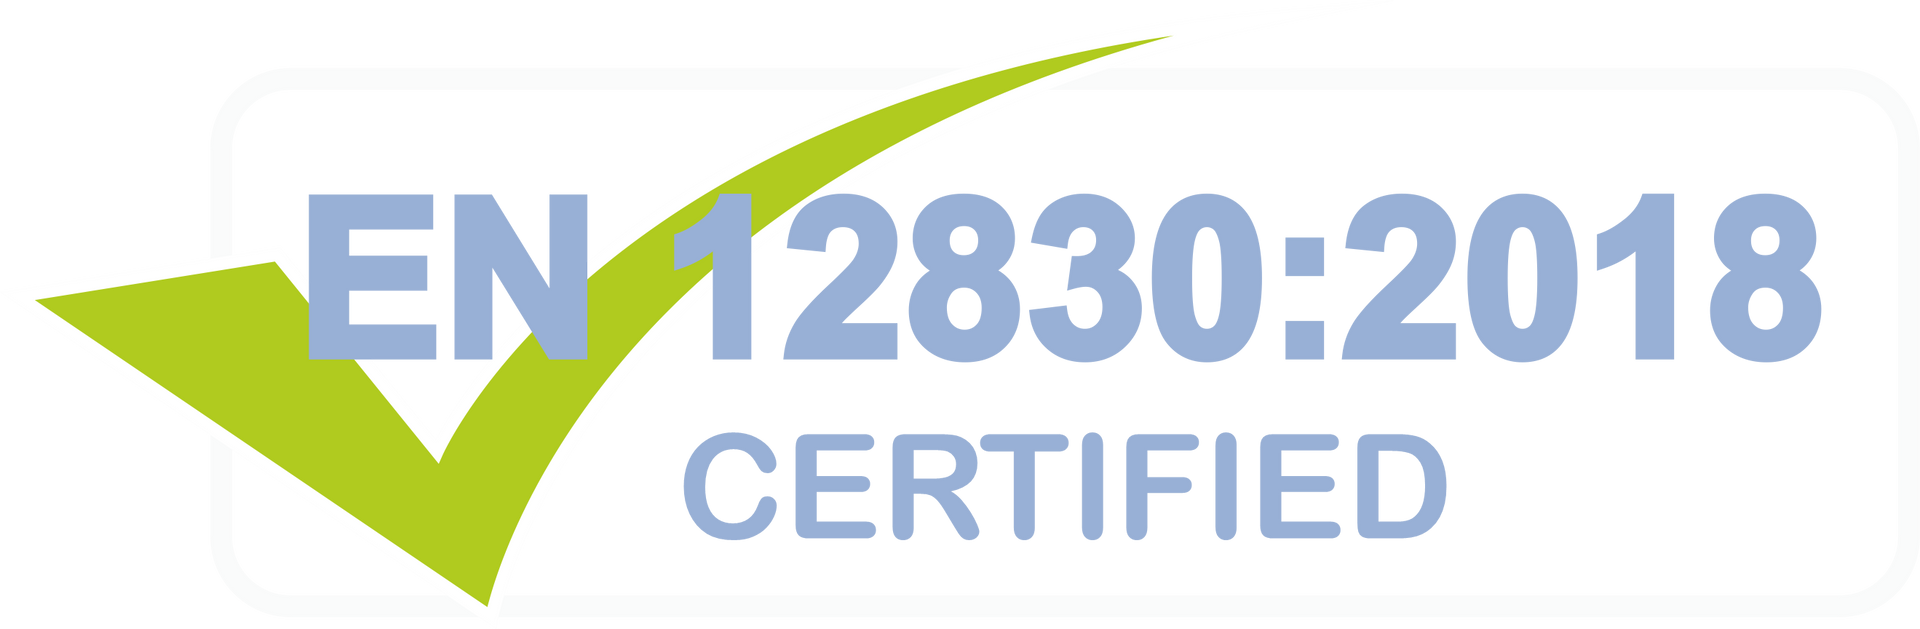 A logo that says en 12830 : 2018 certified with a green check mark.